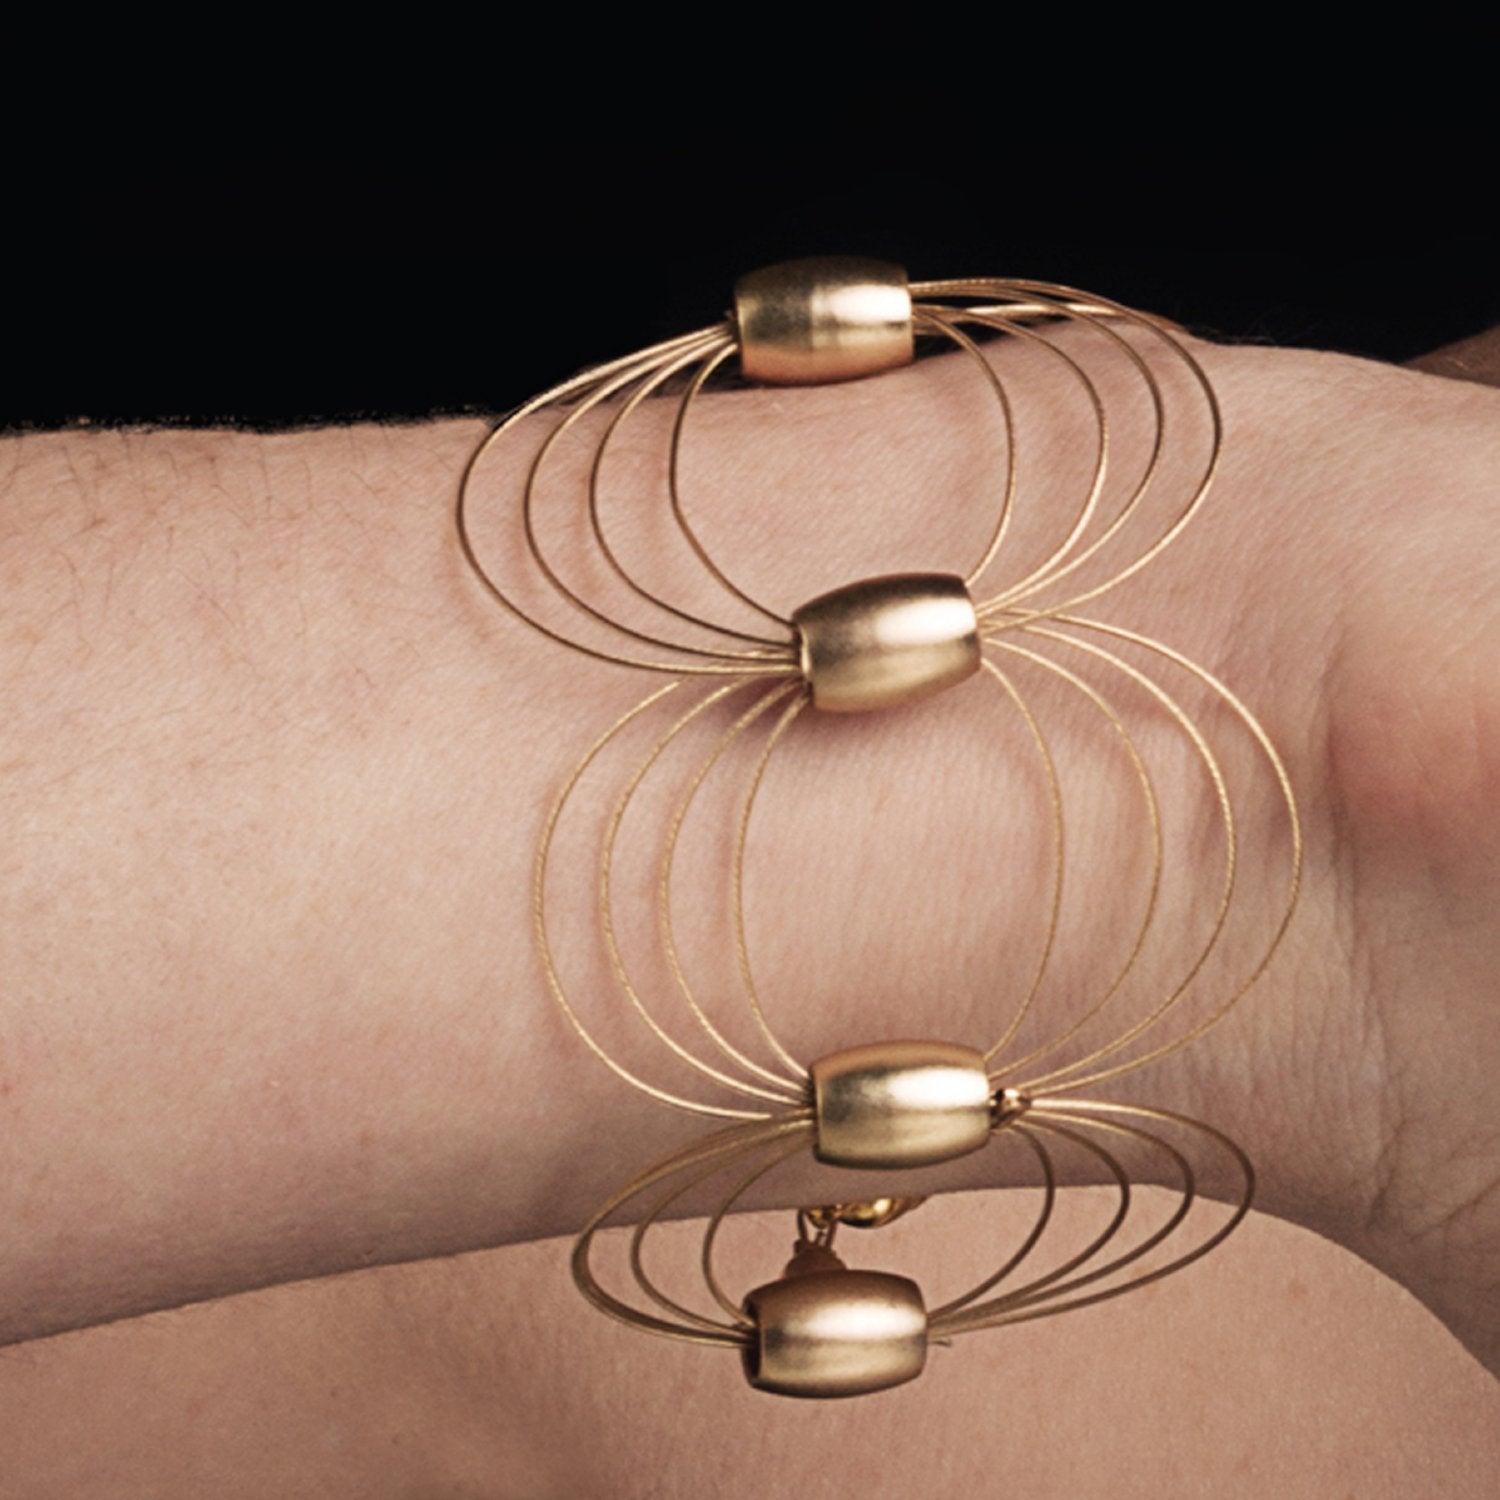 ONDA Bracelet.  Wire Gold Color.  Gold color acrylic Beads.  Magnetic Clasp.  Gold Filled pieces.